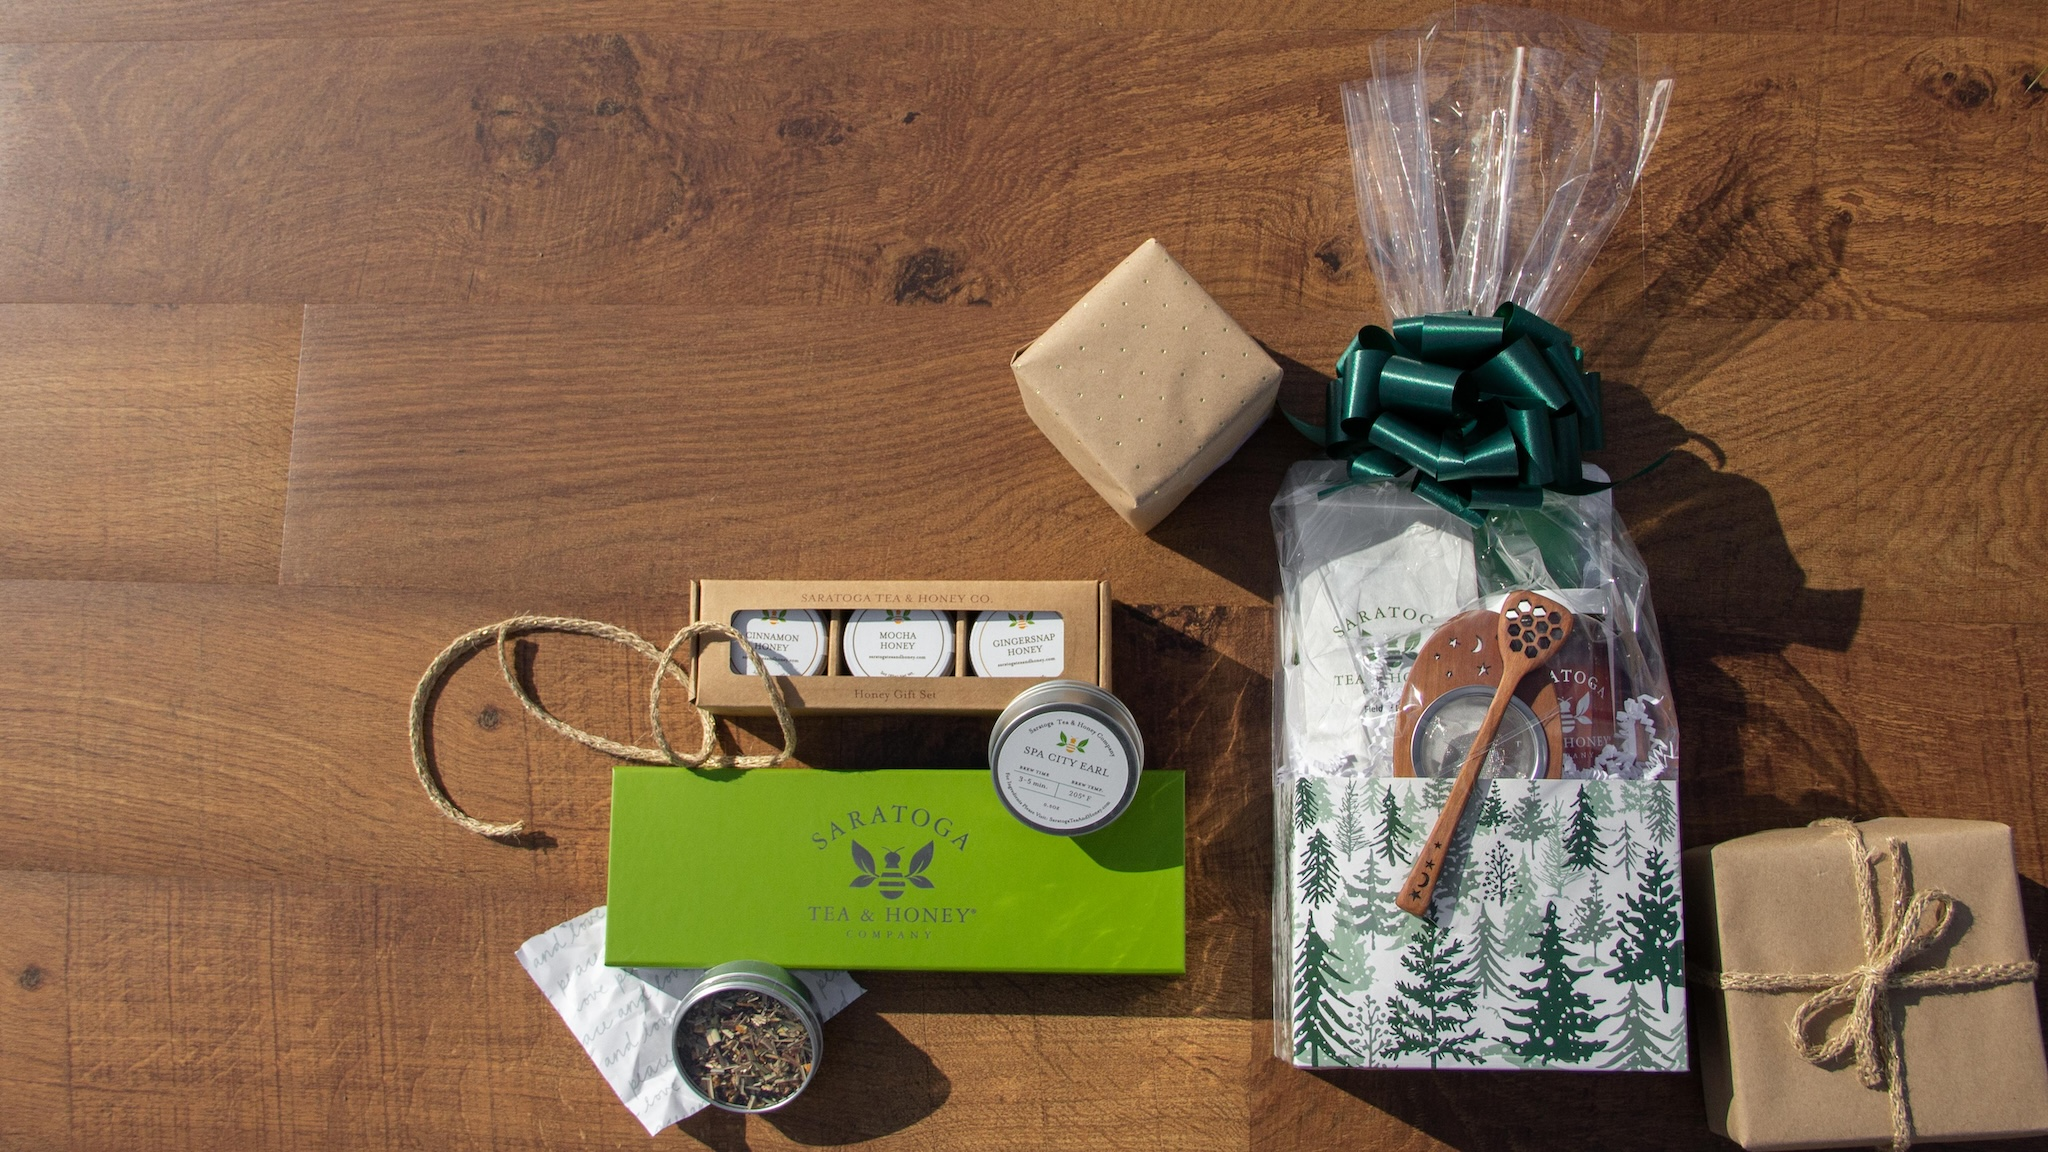 tea gift sets on a wood background with wrapped packages